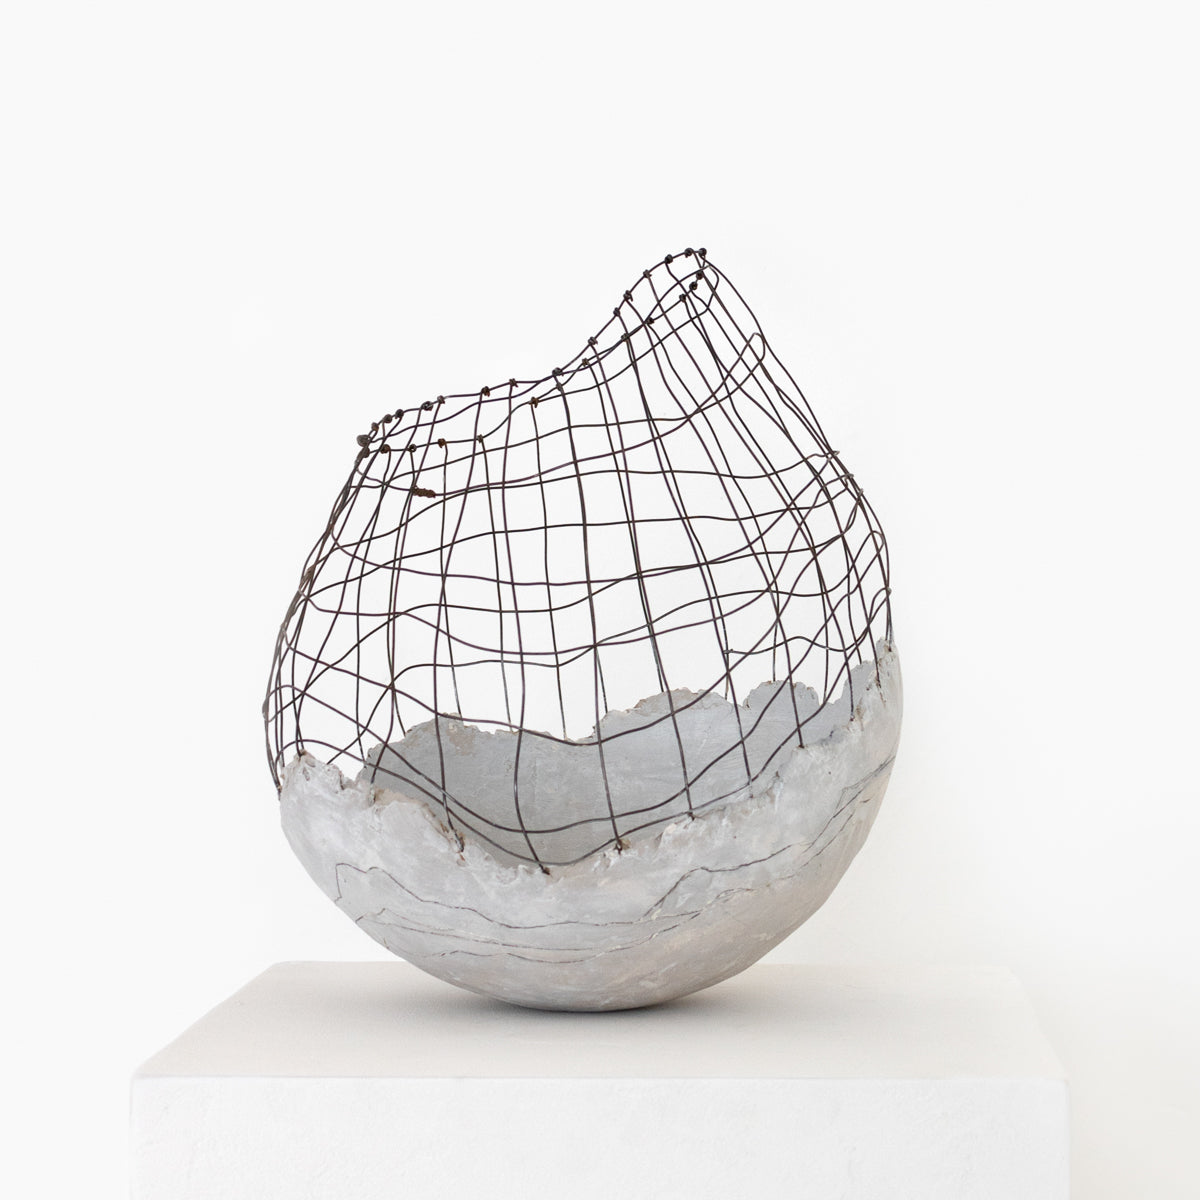 Handmade by artist Jennifer Alden, Vessel Study No. 35 is a contemporary sculpture made from paper clay, plaster, paint and wire. Each unique vessel in this collection is one-of-a-kind, rare, and both primitive and modern. 